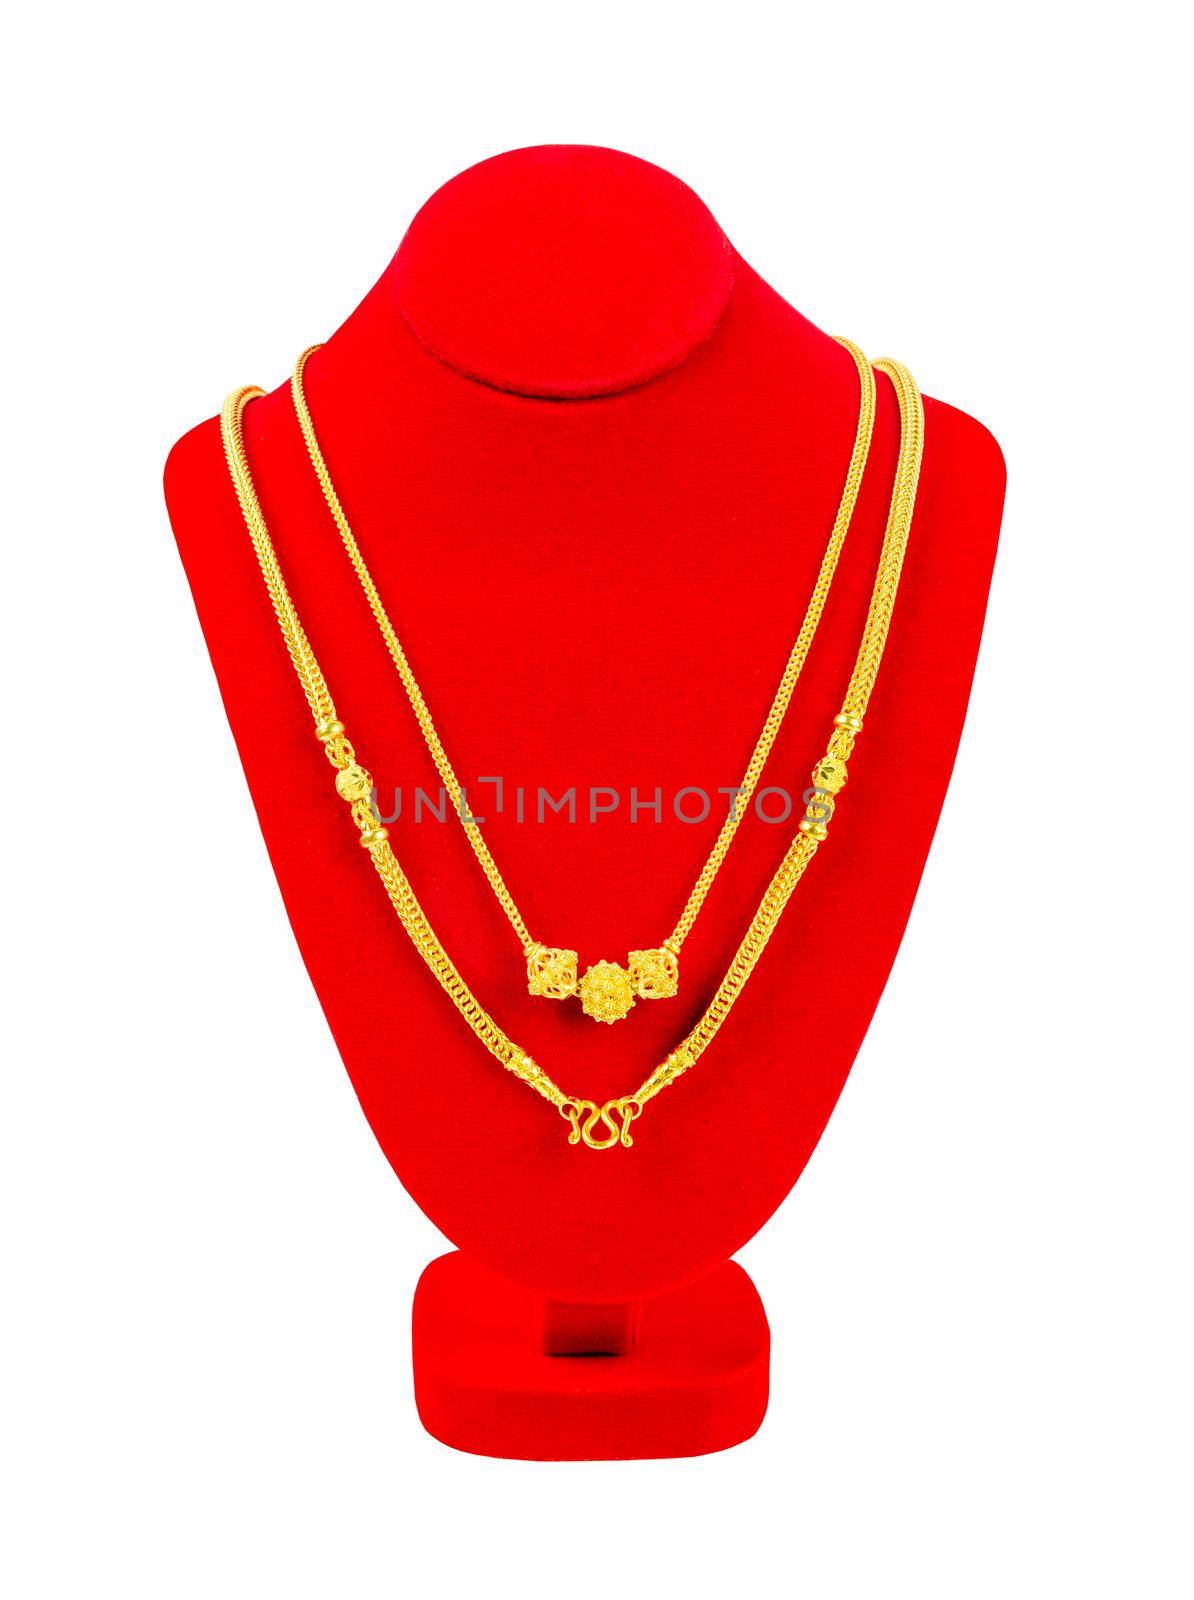 The Gold necklace on necklace display stand isolated on white background, Save Clipping path.